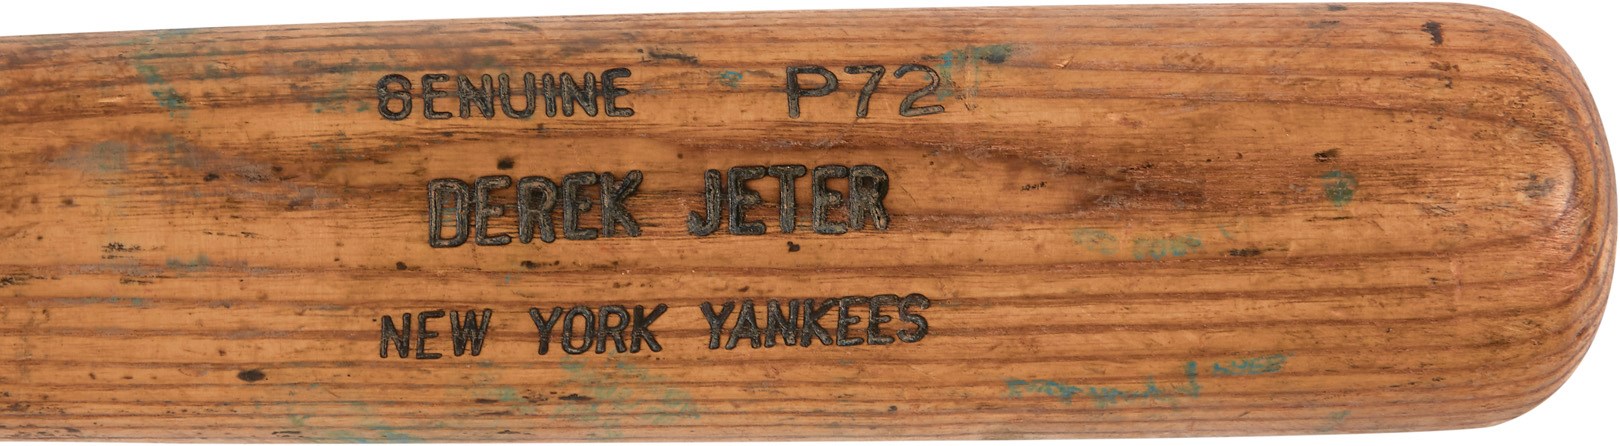 - Derek Jeter Game Used Bat From His Very First Professional Order (PSA 8.5)